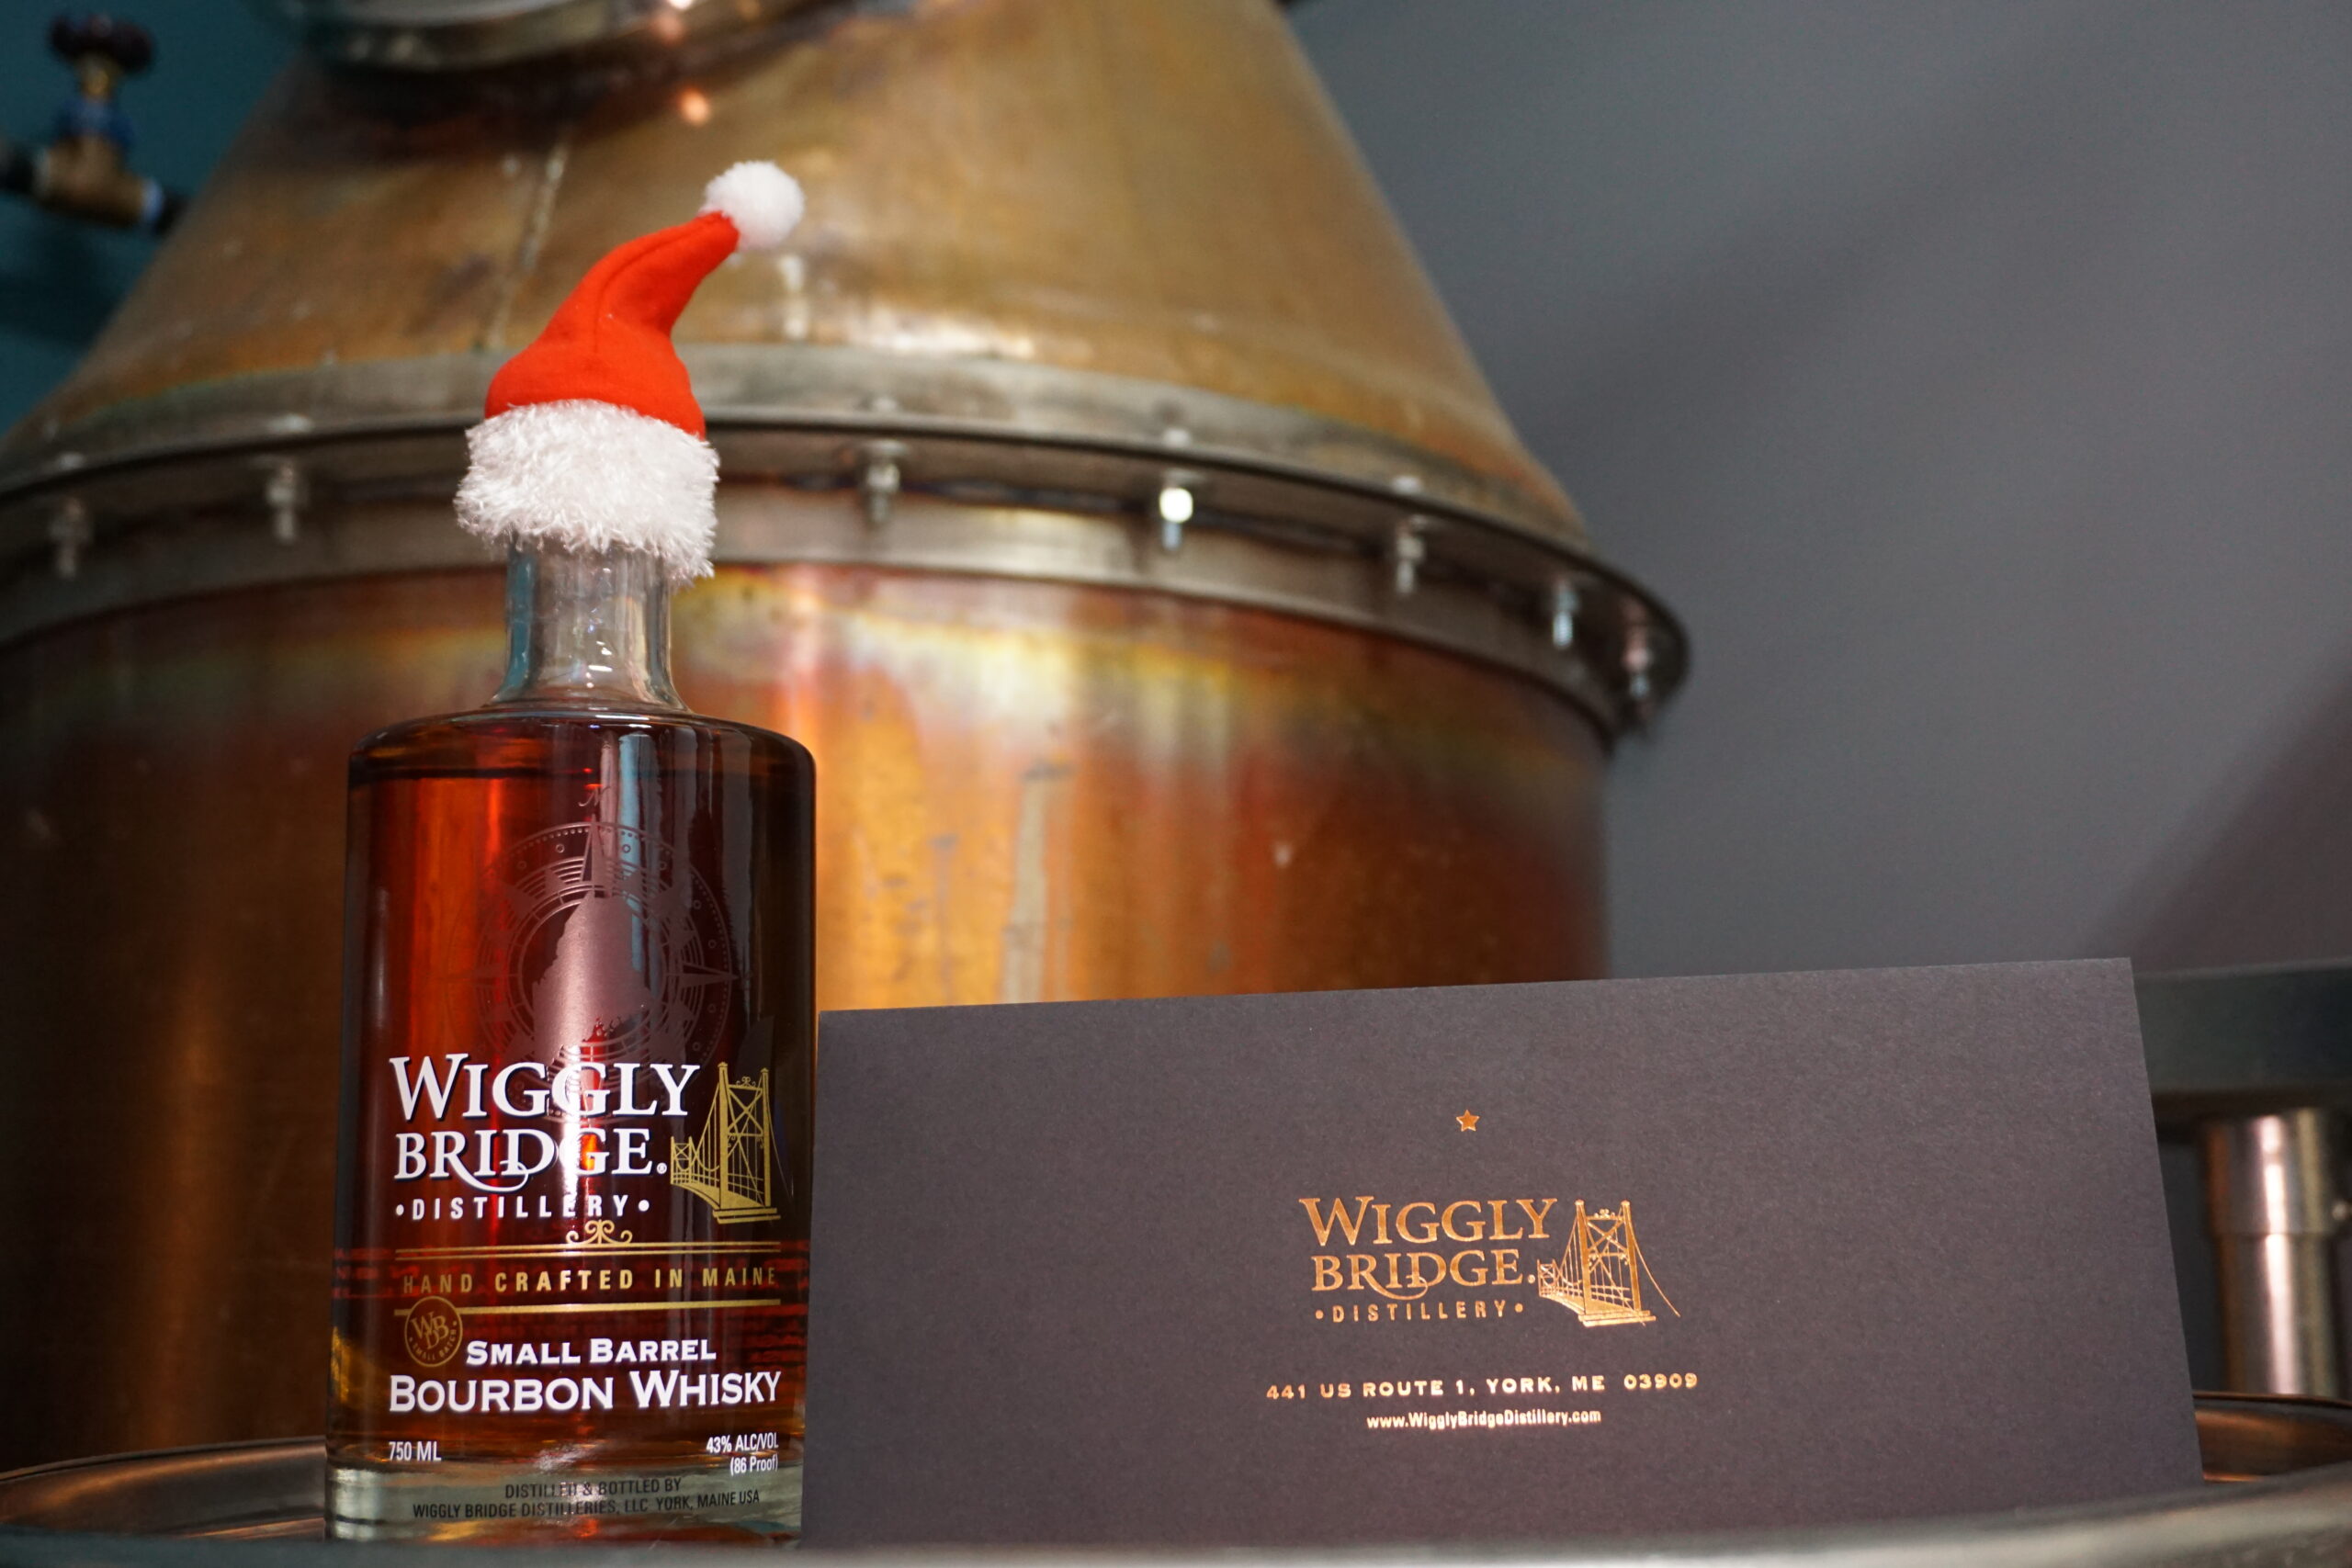 a bottle of wiggly bridge bourbon whiskey wearing a little santa hat next to a gift certificate